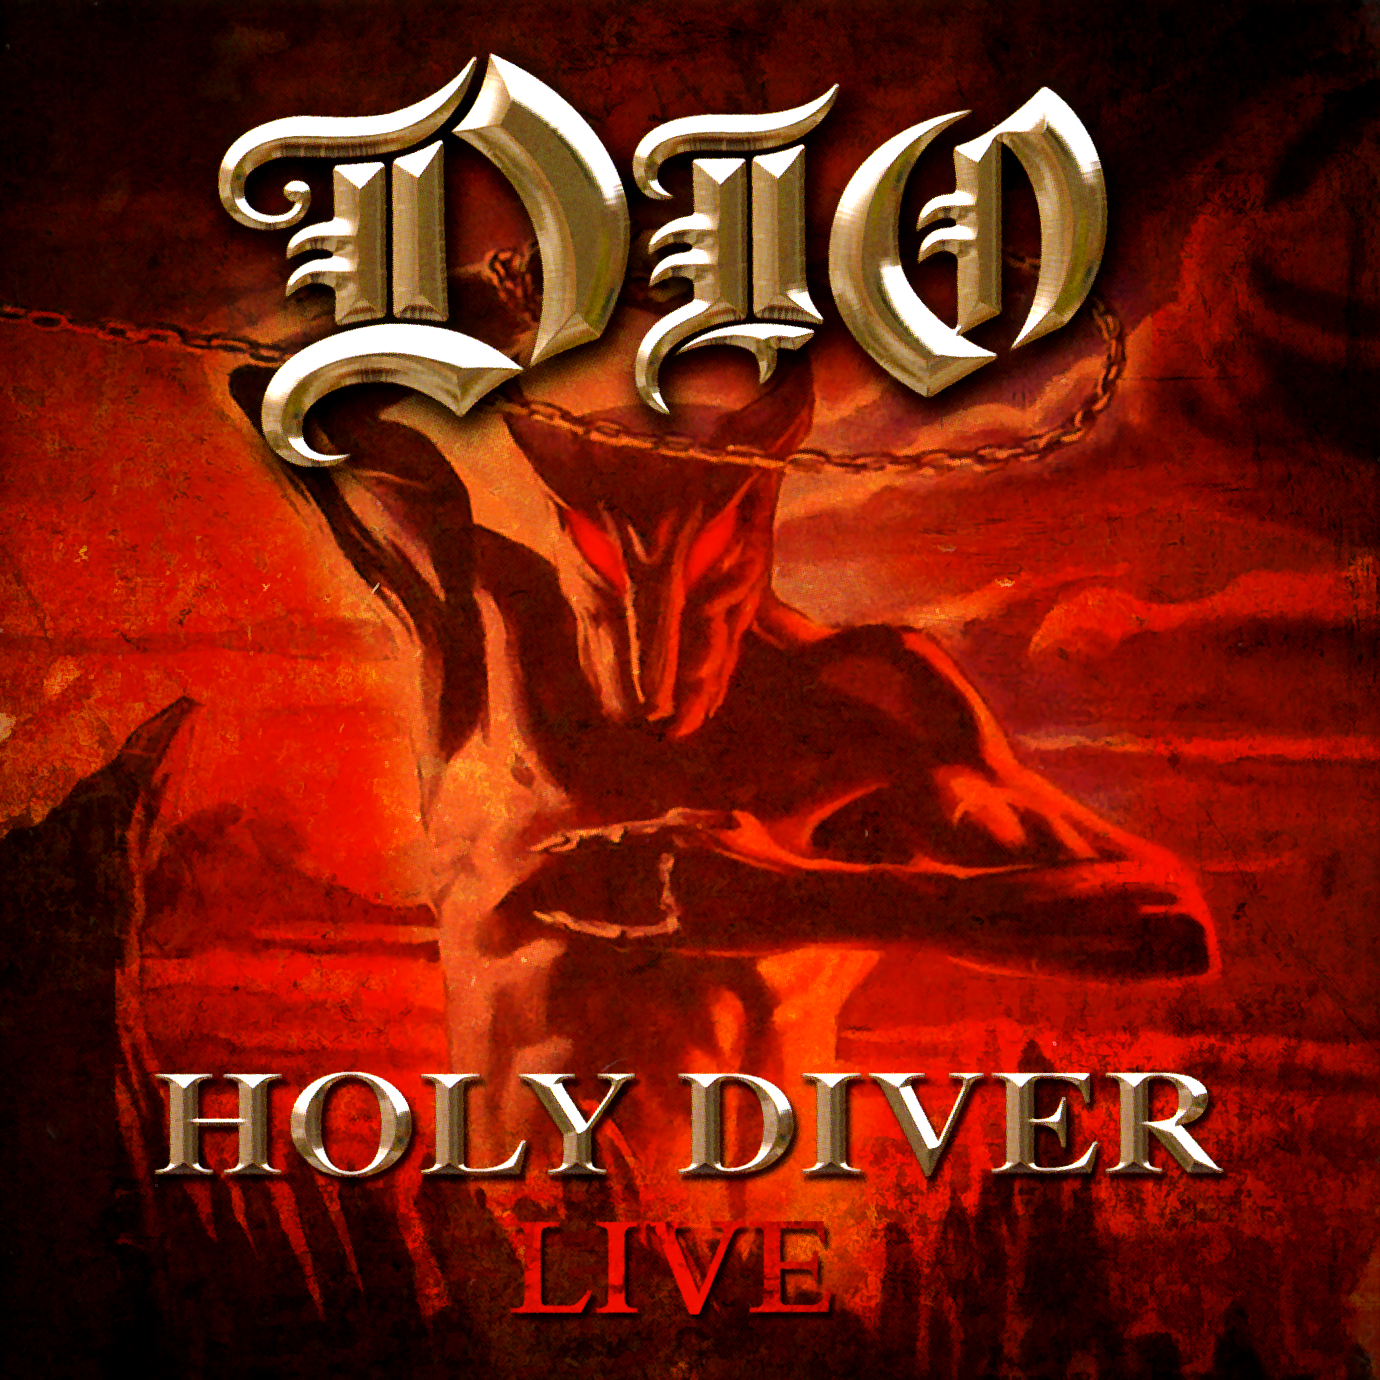 Dio-Holy Diver Live-(EDGCD324)-2CD-FLAC-2006-WRE Download